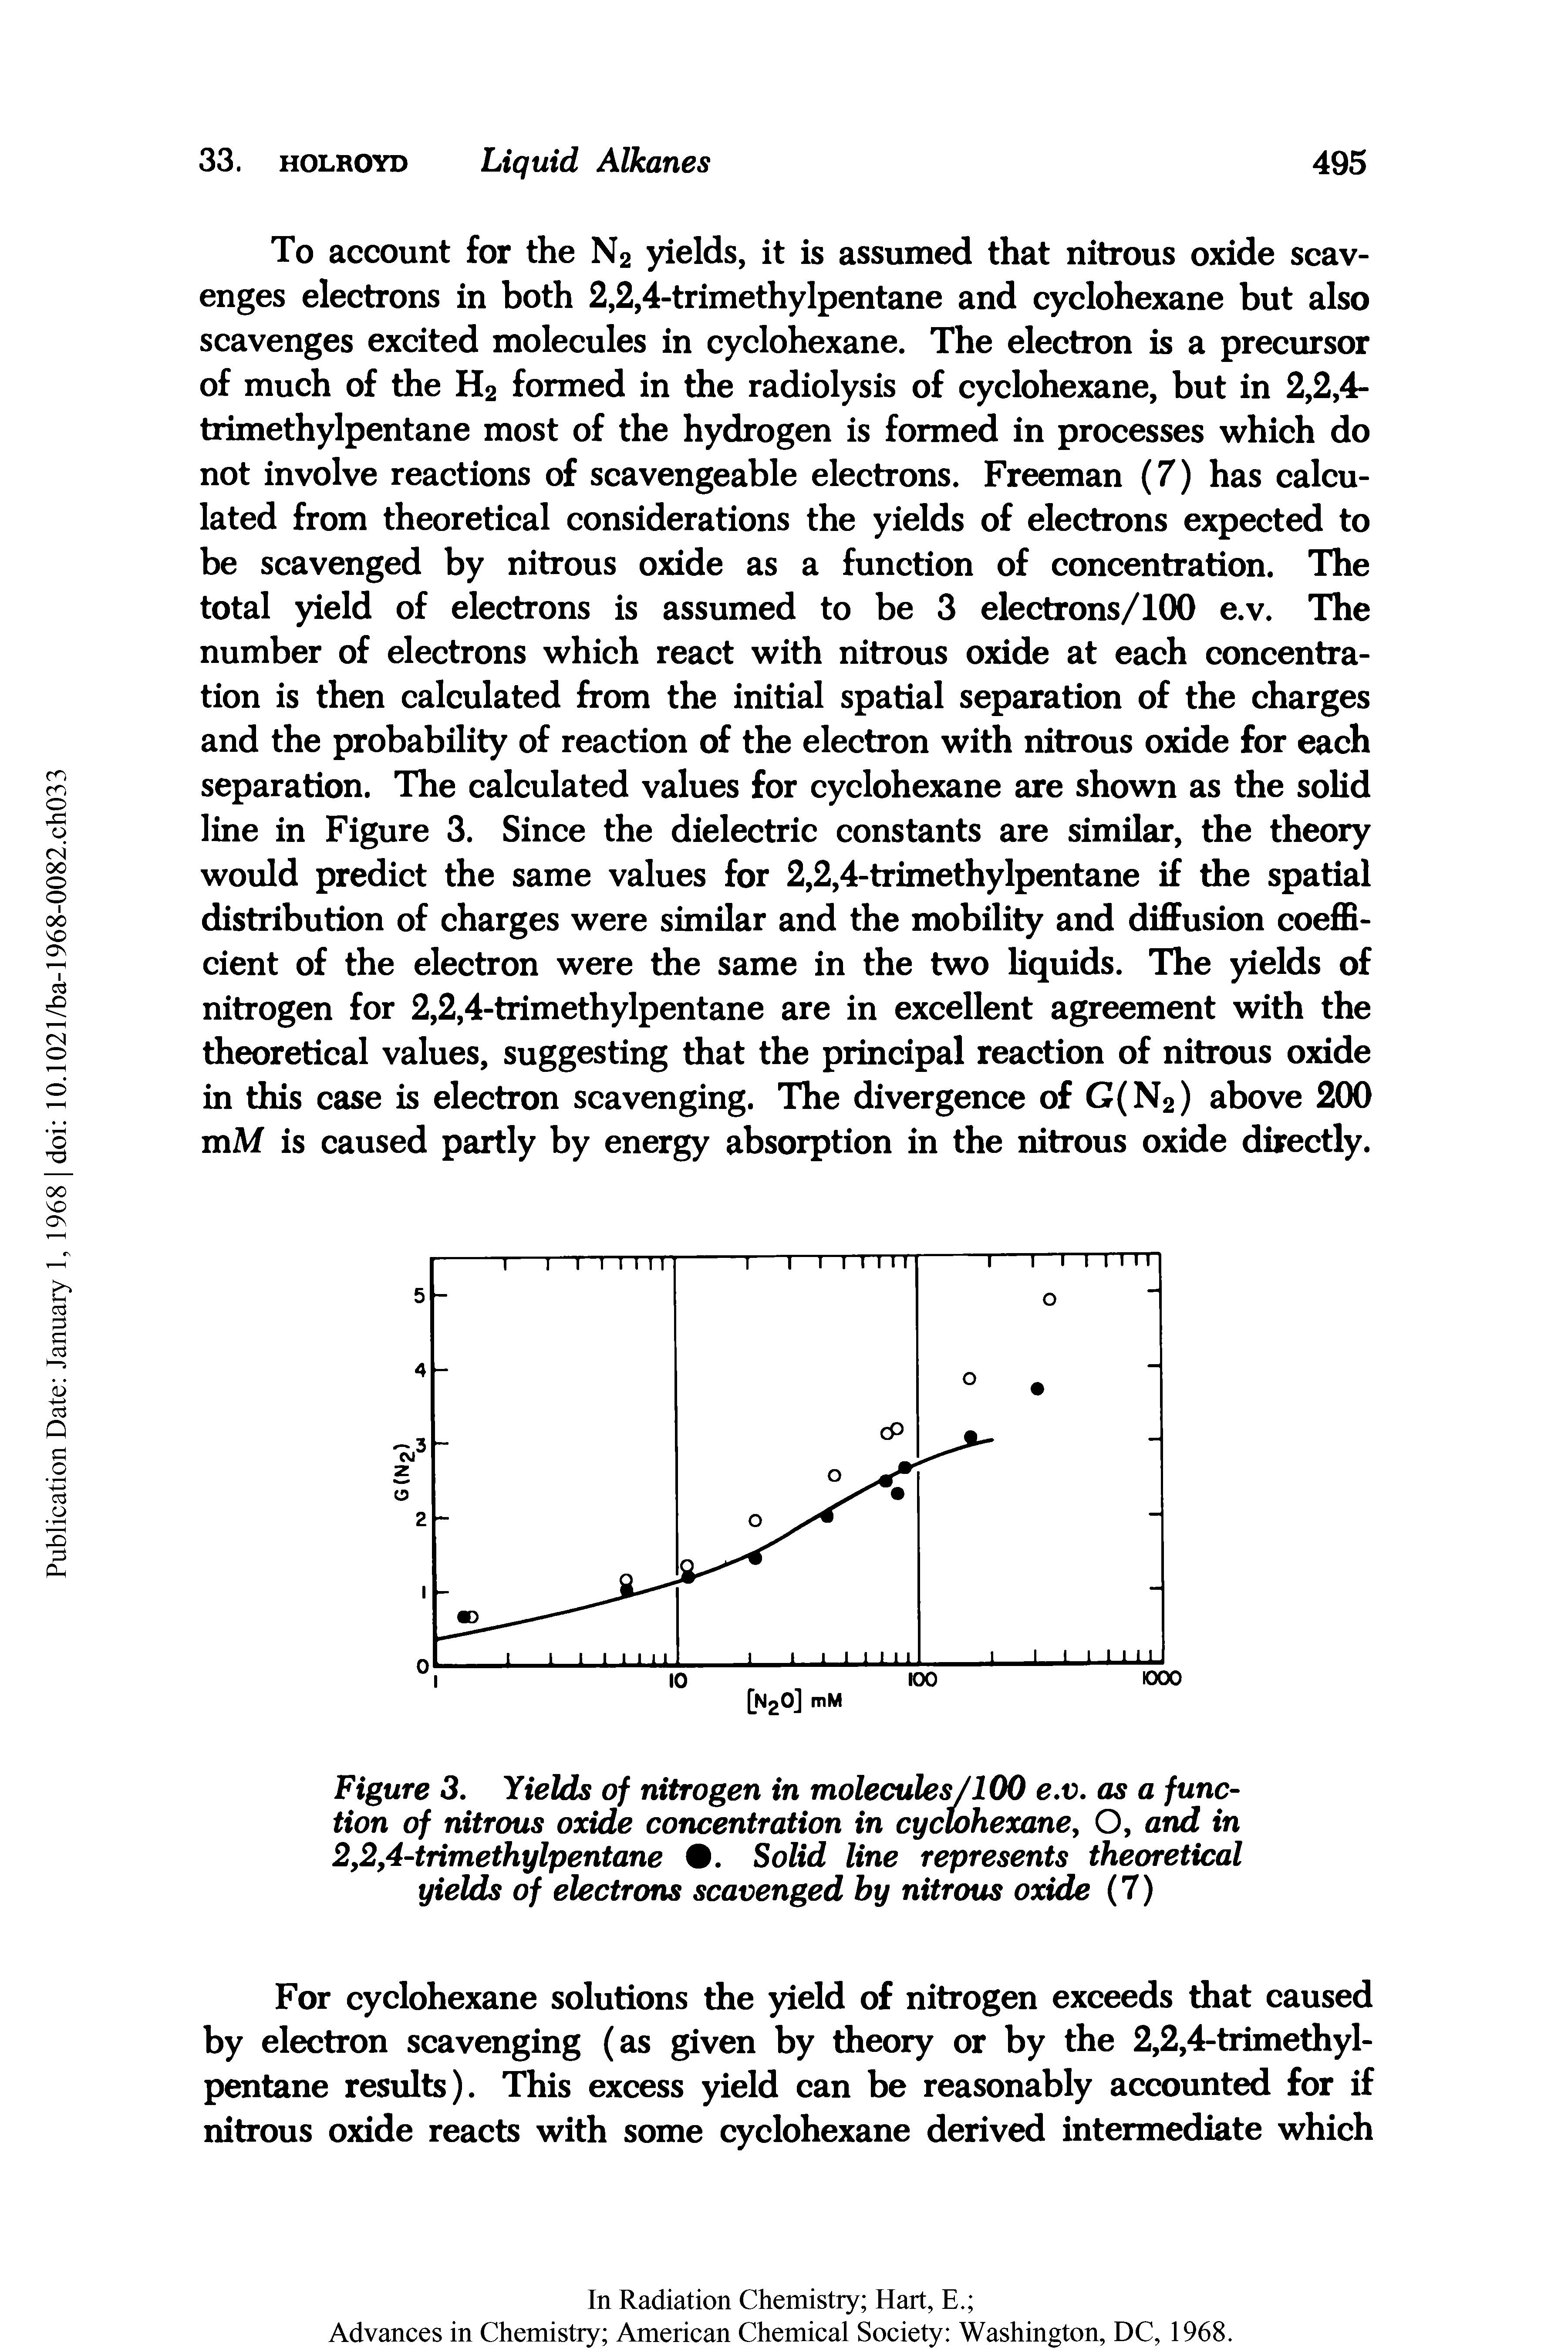 Figure 3. Yields of nitrogen in molecules/100 e.v. as a function of nitrous oxide concentration in cyclohexane, O, and in 2,2,4-trimethylpentane. Solid line represents theoretical yields of electrons scavenged hy nitrous oxide (7)...